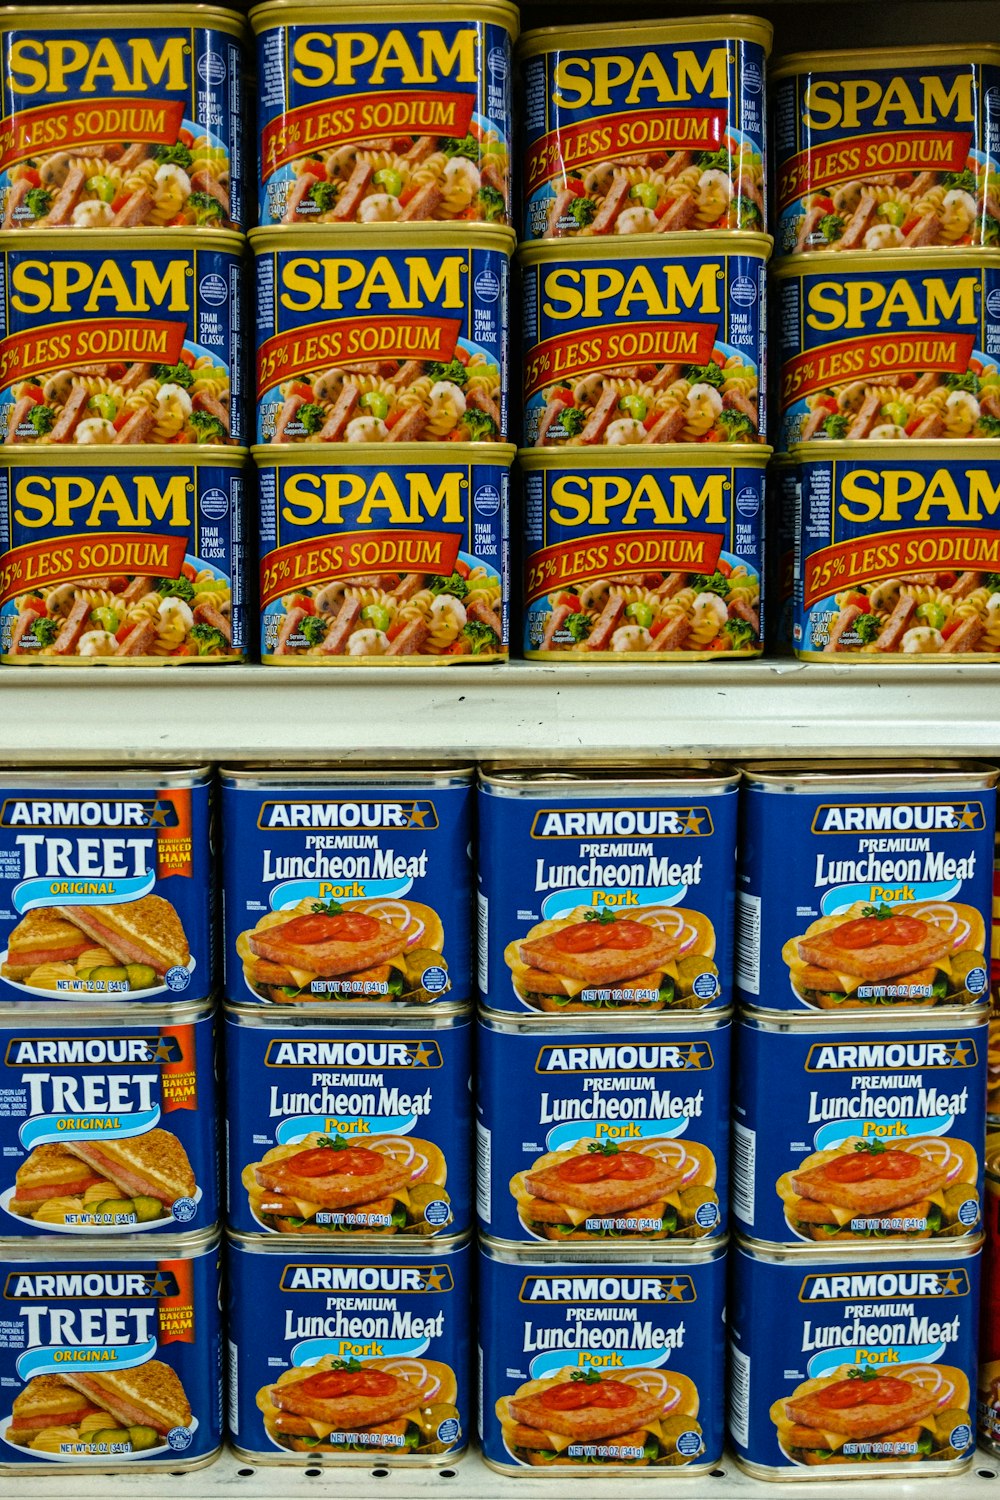 cans of spam are stacked on a shelf